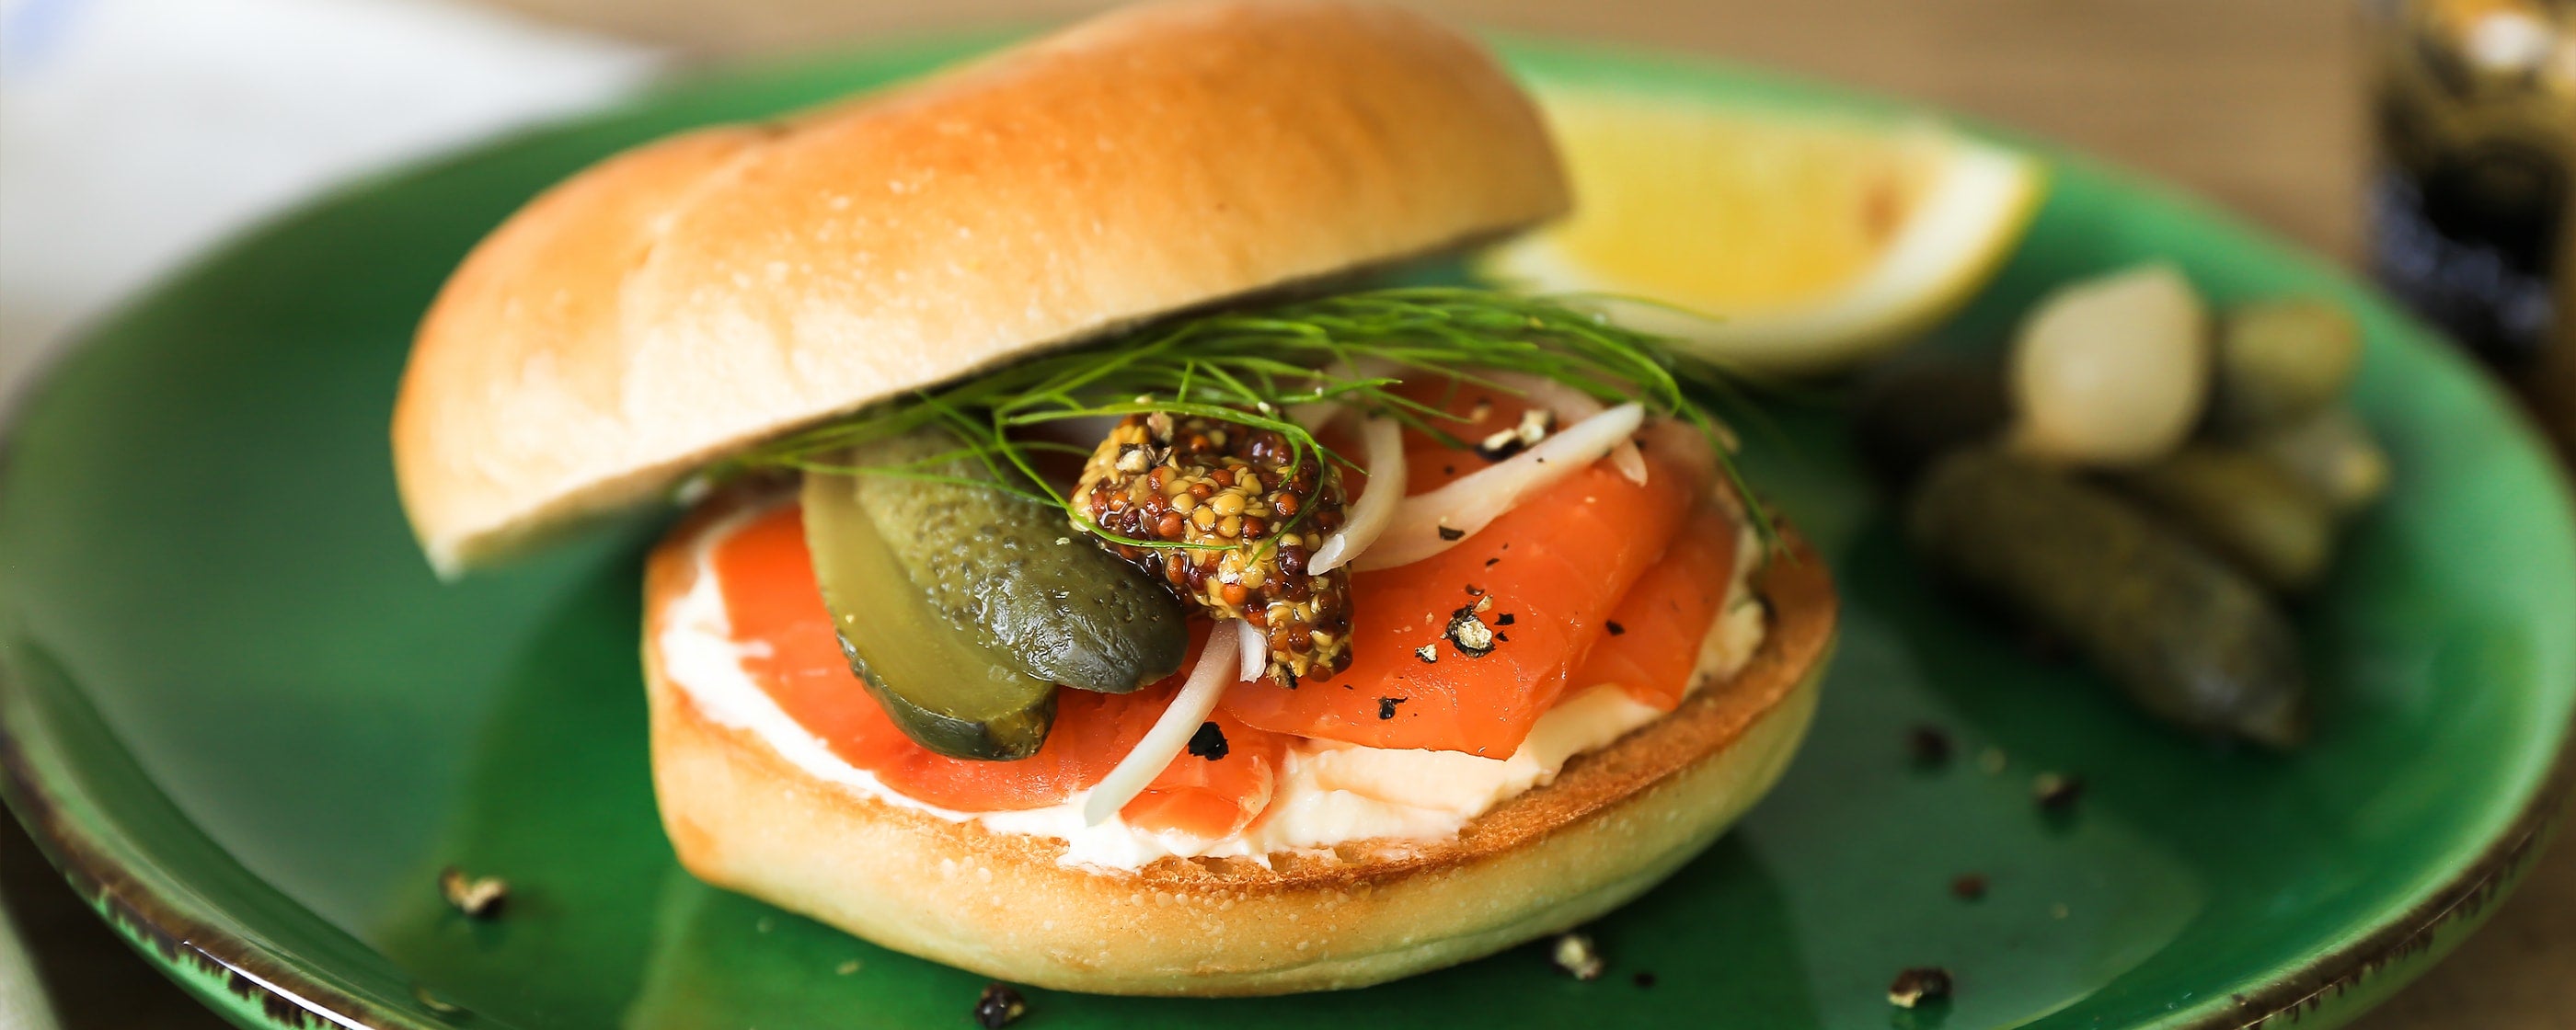 Smoked Salmon and <br>Sour Cream Bagel Sandwich